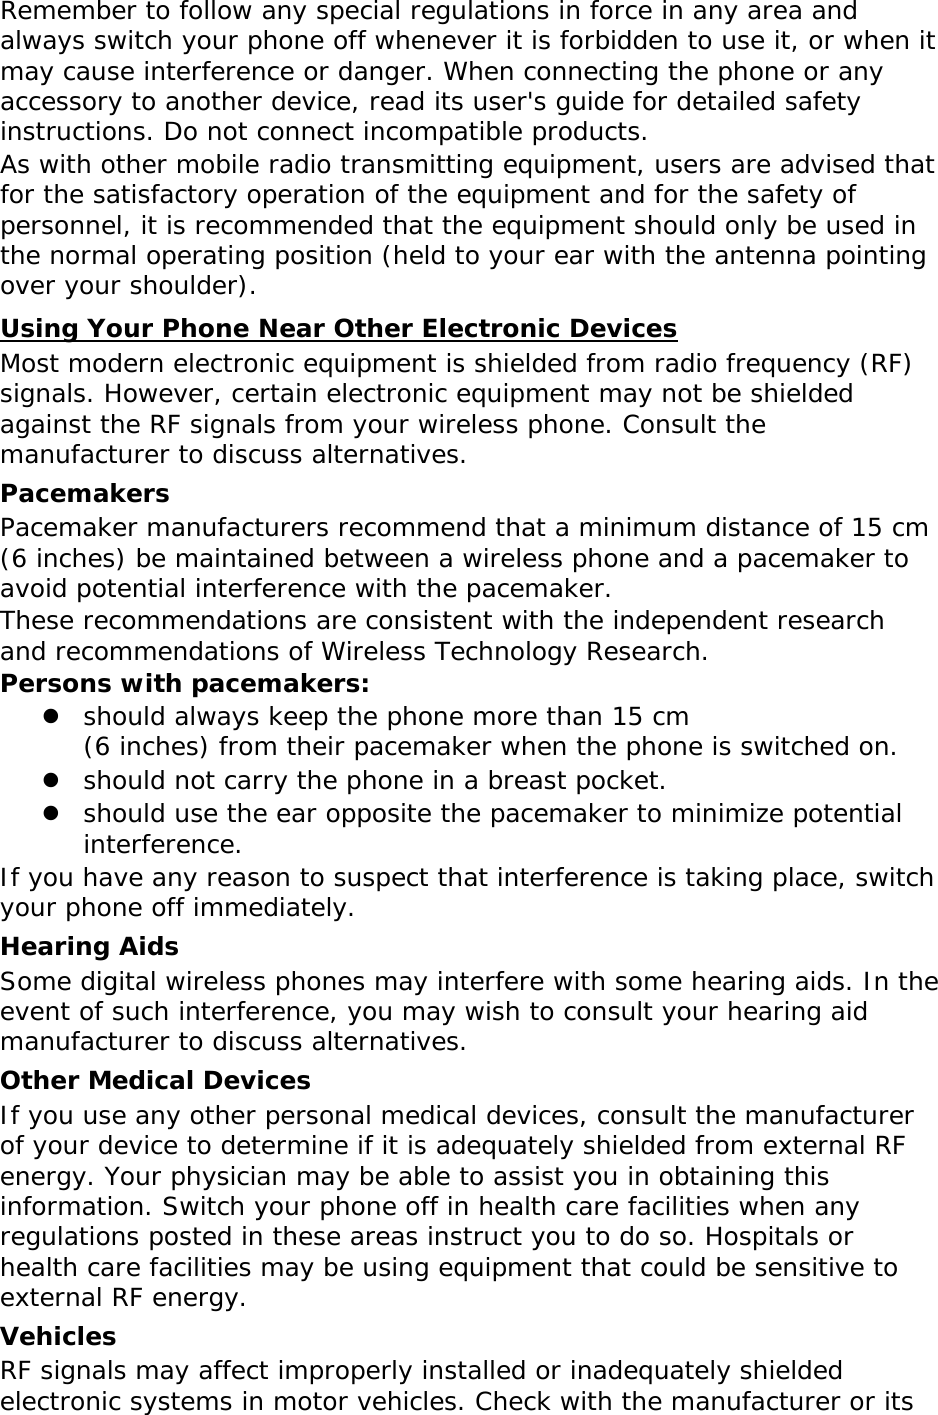 Remember to follow any special regulations in force in any area and always switch your phone off whenever it is forbidden to use it, or when it may cause interference or danger. When connecting the phone or any accessory to another device, read its user&apos;s guide for detailed safety instructions. Do not connect incompatible products. As with other mobile radio transmitting equipment, users are advised that for the satisfactory operation of the equipment and for the safety of personnel, it is recommended that the equipment should only be used in the normal operating position (held to your ear with the antenna pointing over your shoulder). Using Your Phone Near Other Electronic Devices Most modern electronic equipment is shielded from radio frequency (RF) signals. However, certain electronic equipment may not be shielded against the RF signals from your wireless phone. Consult the manufacturer to discuss alternatives. Pacemakers Pacemaker manufacturers recommend that a minimum distance of 15 cm (6 inches) be maintained between a wireless phone and a pacemaker to avoid potential interference with the pacemaker. These recommendations are consistent with the independent research and recommendations of Wireless Technology Research. Persons with pacemakers:  should always keep the phone more than 15 cm  (6 inches) from their pacemaker when the phone is switched on.  should not carry the phone in a breast pocket.  should use the ear opposite the pacemaker to minimize potential interference. If you have any reason to suspect that interference is taking place, switch your phone off immediately. Hearing Aids Some digital wireless phones may interfere with some hearing aids. In the event of such interference, you may wish to consult your hearing aid manufacturer to discuss alternatives. Other Medical Devices If you use any other personal medical devices, consult the manufacturer of your device to determine if it is adequately shielded from external RF energy. Your physician may be able to assist you in obtaining this information. Switch your phone off in health care facilities when any regulations posted in these areas instruct you to do so. Hospitals or health care facilities may be using equipment that could be sensitive to external RF energy. Vehicles RF signals may affect improperly installed or inadequately shielded electronic systems in motor vehicles. Check with the manufacturer or its 